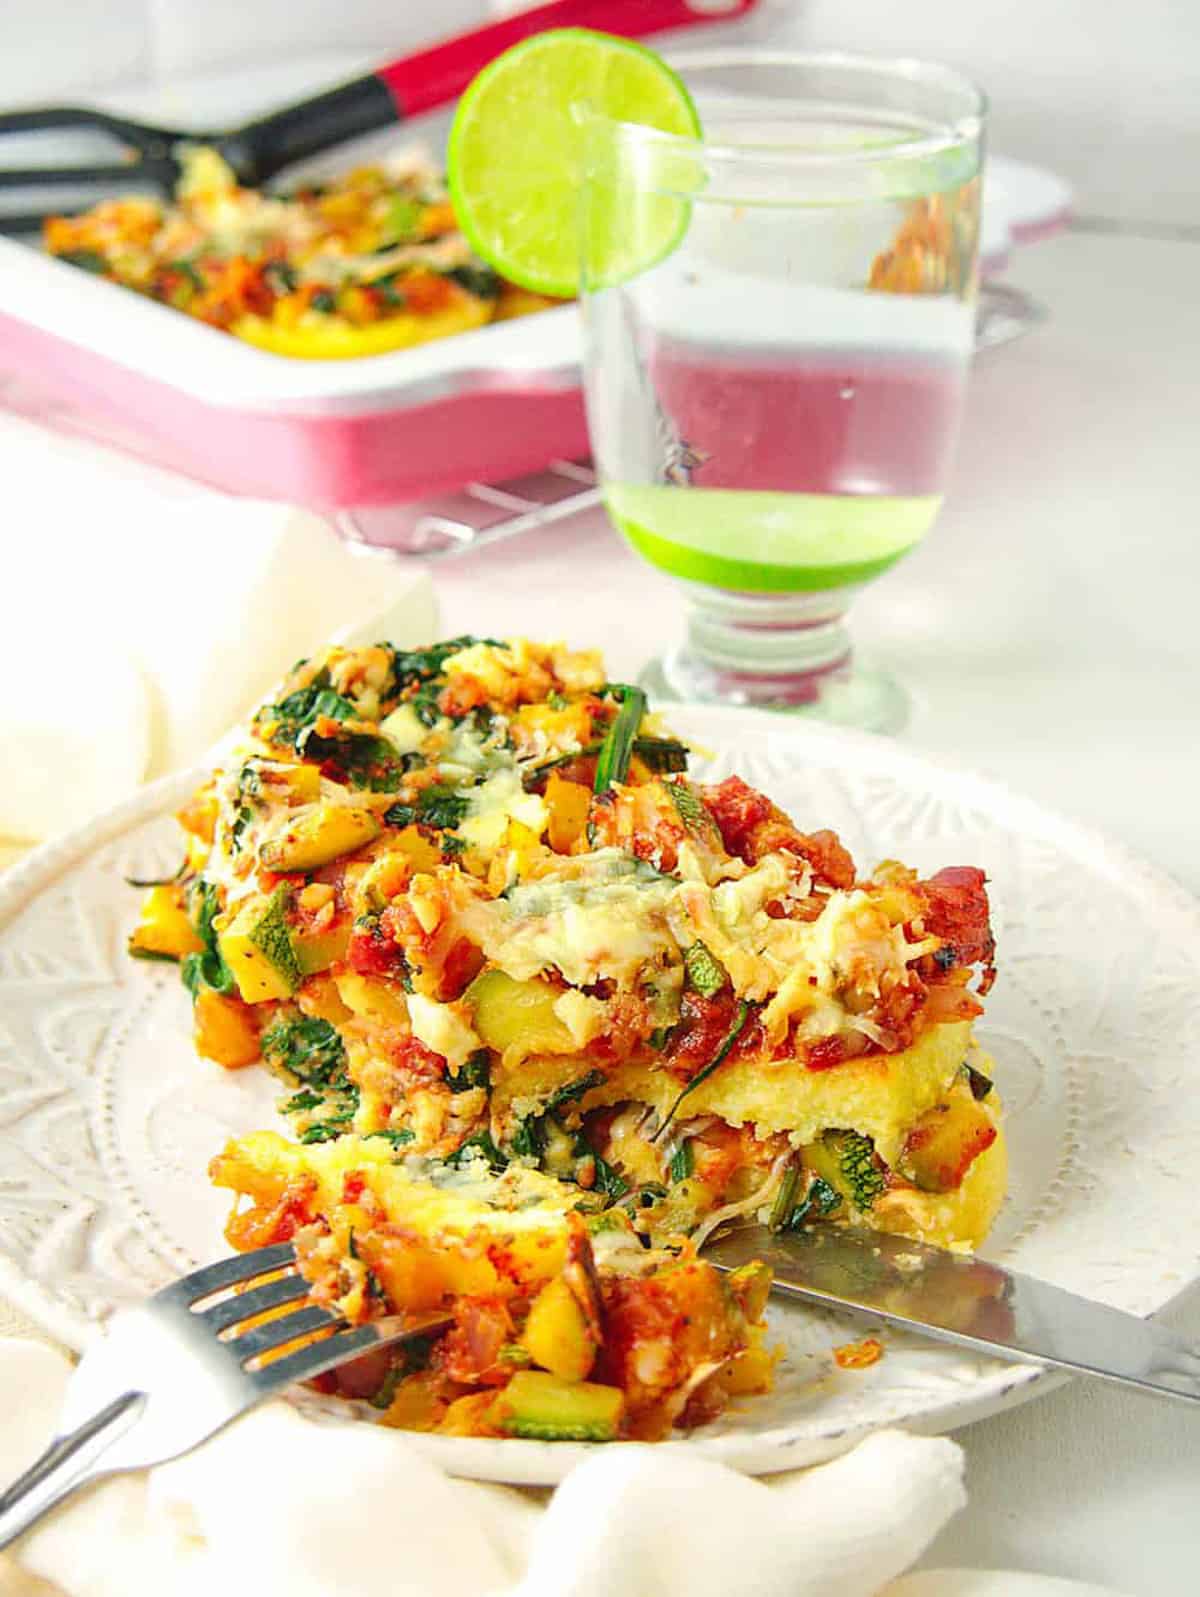 Polenta lasagna layered with melted cheese and vegetables on white plate.